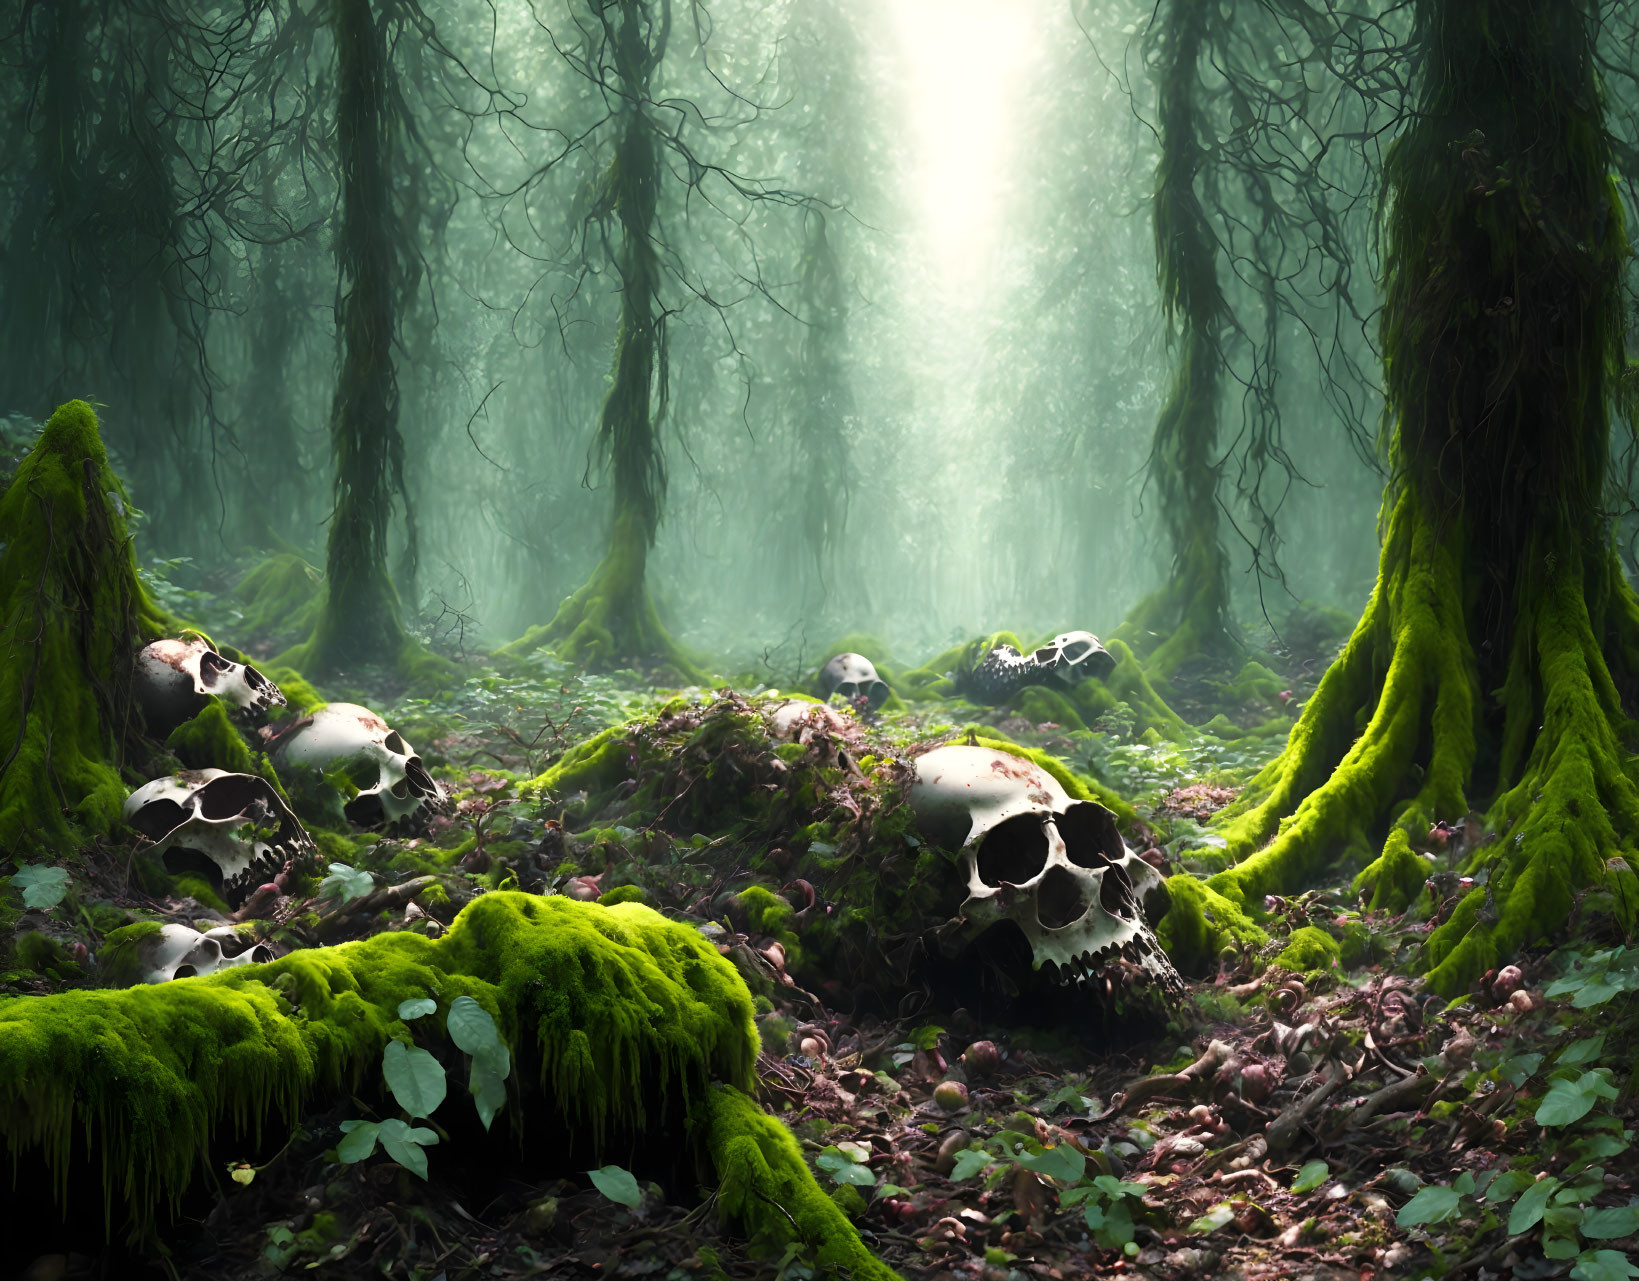 Mystical forest with sunbeams, moss-covered trees, and scattered human skulls